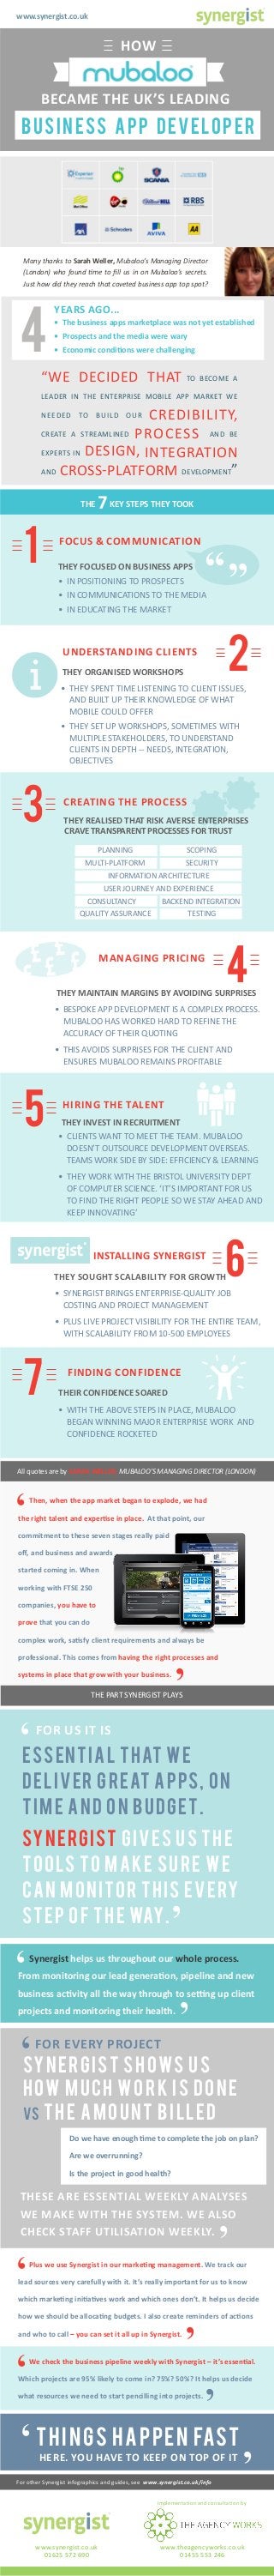 ESSENTIAL THAT WE
DELIVER GREAT APPS, ON
TIME AND ON BUDGET.
SYNERGIST GIVES US THE
TOOLS TO MAKE SURE WE
CAN MONITOR THIS EVERY
STEP OF THE WAY.
FOR US IT IS
‘
£
££ ££
‘
’
www.synergist.co.uk
For other Synergist infographics and guides, see www.synergist.co.uk/info
BECAME THE UK’S LEADING
4
Many thanks to Sarah Weller, Mubaloo’s Managing Director
(London) who found time to fill us in on Mubaloo’s secrets.
Just how did they reach that coveted business app top spot?
YEARS AGO...
•	 The business apps marketplace was not yet established
•	 Prospects and the media were wary
•	 Economic conditions were challenging
THE 7KEY STEPS THEY TOOK
“WE DECIDED THAT TO BECOME A
LEADER IN THE ENTERPRISE MOBILE APP MARKET WE
NEEDED TO BUILD OUR CREDIBILITY,
CREATE A STREAMLINED PROCESS AND BE
EXPERTS IN DESIGN, INTEGRATION
AND CROSS-PLATFORM DEVELOPMENT”
1 “
“FOCUS & COMMUNICATION
THEY FOCUSED ON BUSINESS APPS
•	 IN POSITIONING TO PROSPECTS
•	 IN COMMUNICATIONS TO THE MEDIA
•	 IN EDUCATING THE MARKET
2UNDERSTANDING CLIENTS
THEY ORGANISED WORKSHOPS
•	 THEY SPENT TIME LISTENING TO CLIENT ISSUES,
AND BUILT UP THEIR KNOWLEDGE OF WHAT
MOBILE COULD OFFER
•	 THEY SET UP WORKSHOPS, SOMETIMES WITH
MULTIPLE STAKEHOLDERS, TO UNDERSTAND
CLIENTS IN DEPTH -- NEEDS, INTEGRATION,
OBJECTIVES
3 CREATING THE PROCESS
CRAVE TRANSPARENT PROCESSES FOR TRUST
4
MANAGING PRICING
THEY MAINTAIN MARGINS BY AVOIDING SURPRISES
i
5 HIRING THE TALENT
THEY INVEST IN RECRUITMENT
•	 CLIENTS WANT TO MEET THE TEAM. MUBALOO
DOESN’T OUTSOURCE DEVELOPMENT OVERSEAS.
TEAMS WORK SIDE BY SIDE: EFFICIENCY & LEARNING
•	 THEY WORK WITH THE BRISTOL UNIVERSITY DEPT
OF COMPUTER SCIENCE. ‘IT’S IMPORTANT FOR US
TO FIND THE RIGHT PEOPLE SO WE STAY AHEAD AND
KEEP INNOVATING’
•	 BESPOKE APP DEVELOPMENT IS A COMPLEX PROCESS.
MUBALOO HAS WORKED HARD TO REFINE THE
ACCURACY OF THEIR QUOTING
•	 THIS AVOIDS SURPRISES FOR THE CLIENT AND
ENSURES MUBALOO REMAINS PROFITABLE
6INSTALLING SYNERGIST
•	 SYNERGIST BRINGS ENTERPRISE-QUALITY JOB
COSTING AND PROJECT MANAGEMENT
•	 PLUS LIVE PROJECT VISIBILITY FOR THE ENTIRE TEAM,
WITH SCALABILITY FROM 10-500 EMPLOYEES
synergist
R
THEY SOUGHT SCALABILITY FOR GROWTH
PLANNING SCOPING
MULTI-PLATFORM SECURITY
TESTINGQUALITY ASSURANCE
INFORMATION ARCHITECTURE
USER JOURNEY AND EXPERIENCE
THINGS HAPPEN FAST
HERE. YOU HAVE TO KEEP ON TOP OF IT
‘
’
SYNERGIST SHOWS US
HOW MUCH WORK IS DONE
VS THE AMOUNT BILLED
FOR EVERY PROJECT
‘
Do we have enough time to complete the job on plan?
Are we overrunning?
Is the project in good health?
THESE ARE ESSENTIAL WEEKLY ANALYSES
WE MAKE WITH THE SYSTEM. WE ALSO
CHECK STAFF UTILISATION WEEKLY.
Plus we use Synergist in our marketing management. We track our
lead sources very carefully with it. It’s really important for us to know
which marketing initiatives work and which ones don’t. It helps us decide
how we should be allocating budgets. I also create reminders of actions
and who to call – you can set it all up in Synergist.
We check the business pipeline weekly with Synergist – it’s essential.
Which projects are 95% likely to come in? 75%? 50%? It helps us decide
what resources we need to start pencilling into projects.
’
THEY REALISED THAT RISK AVERSE ENTERPRISES
7 FINDING CONFIDENCE
THEIR CONFIDENCE SOARED
•	 WITH THE ABOVE STEPS IN PLACE, MUBALOO
BEGAN WINNING MAJOR ENTERPRISE WORK AND
CONFIDENCE ROCKETED
All quotes are by SARAH WELLER, MUBALOO’S MANAGING DIRECTOR (LONDON)
THE PART SYNERGIST PLAYS
‘
BACKEND INTEGRATIONCONSULTANCY
‘
’
BUSINESS APP DEVELOPER
HOW
’
’
Synergist helps us throughout our whole process.
From monitoring our lead generation, pipeline and new
business activity all the way through to setting up client
projects and monitoring their health.
‘
’
Then, when the app market began to explode, we had
the right talent and expertise in place. At that point, our
commitment to these seven stages really paid
off, and business and awards
started coming in. When
working with FTSE 250
companies, you have to
prove that you can do
complex work, satisfy client requirements and always be
professional. This comes from having the right processes and
systems in place that grow with your business.
www.synergist.co.uk
01625 572 690
Implementation and consultation by
www.theagencyworks.co.uk
01455 553 246
 